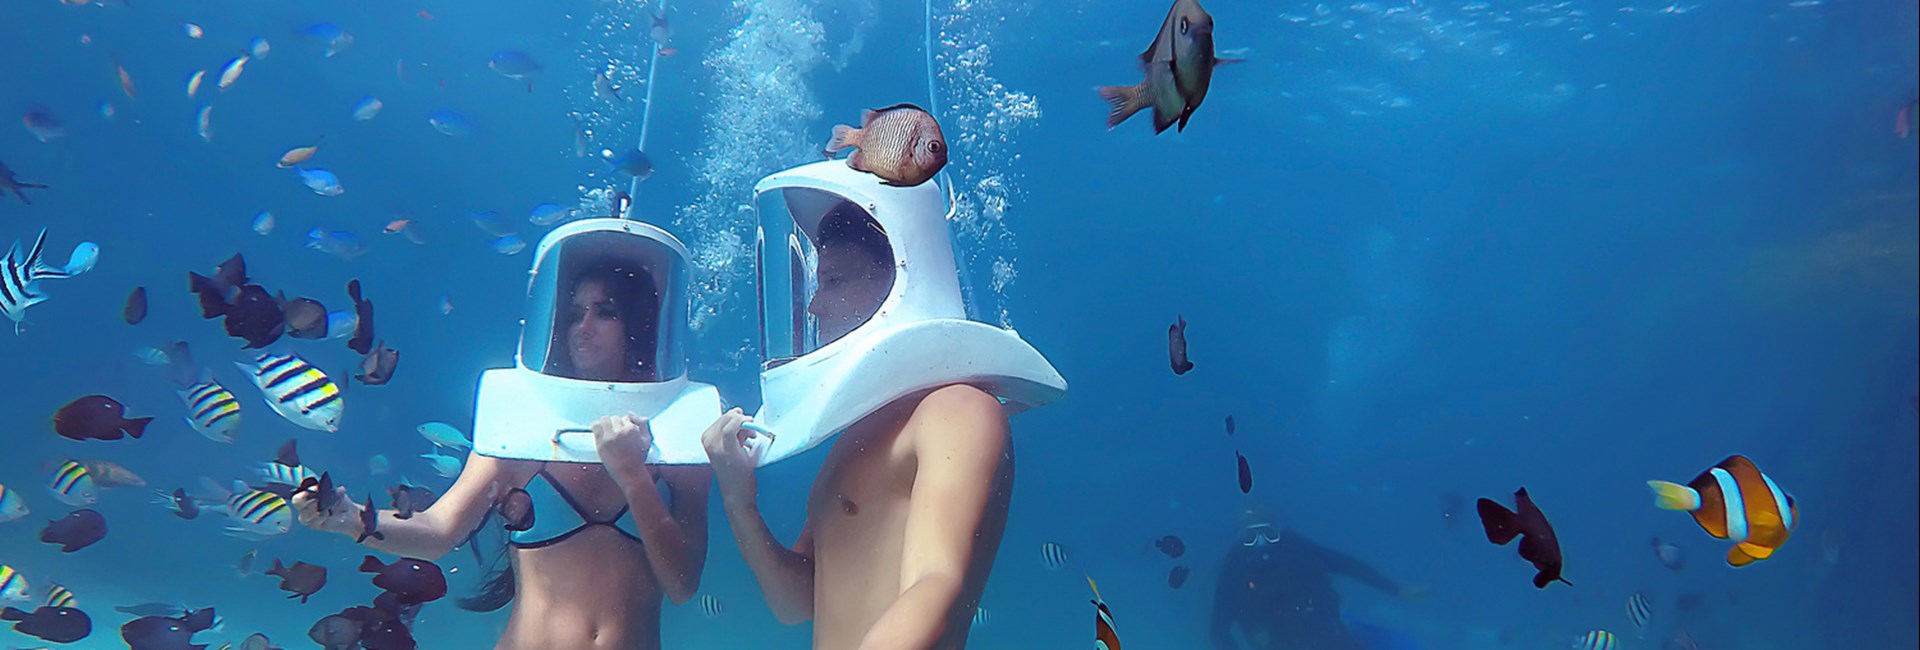 Couple Helmet Diving In Clear Blue Carribean Sea With Tropical Fish